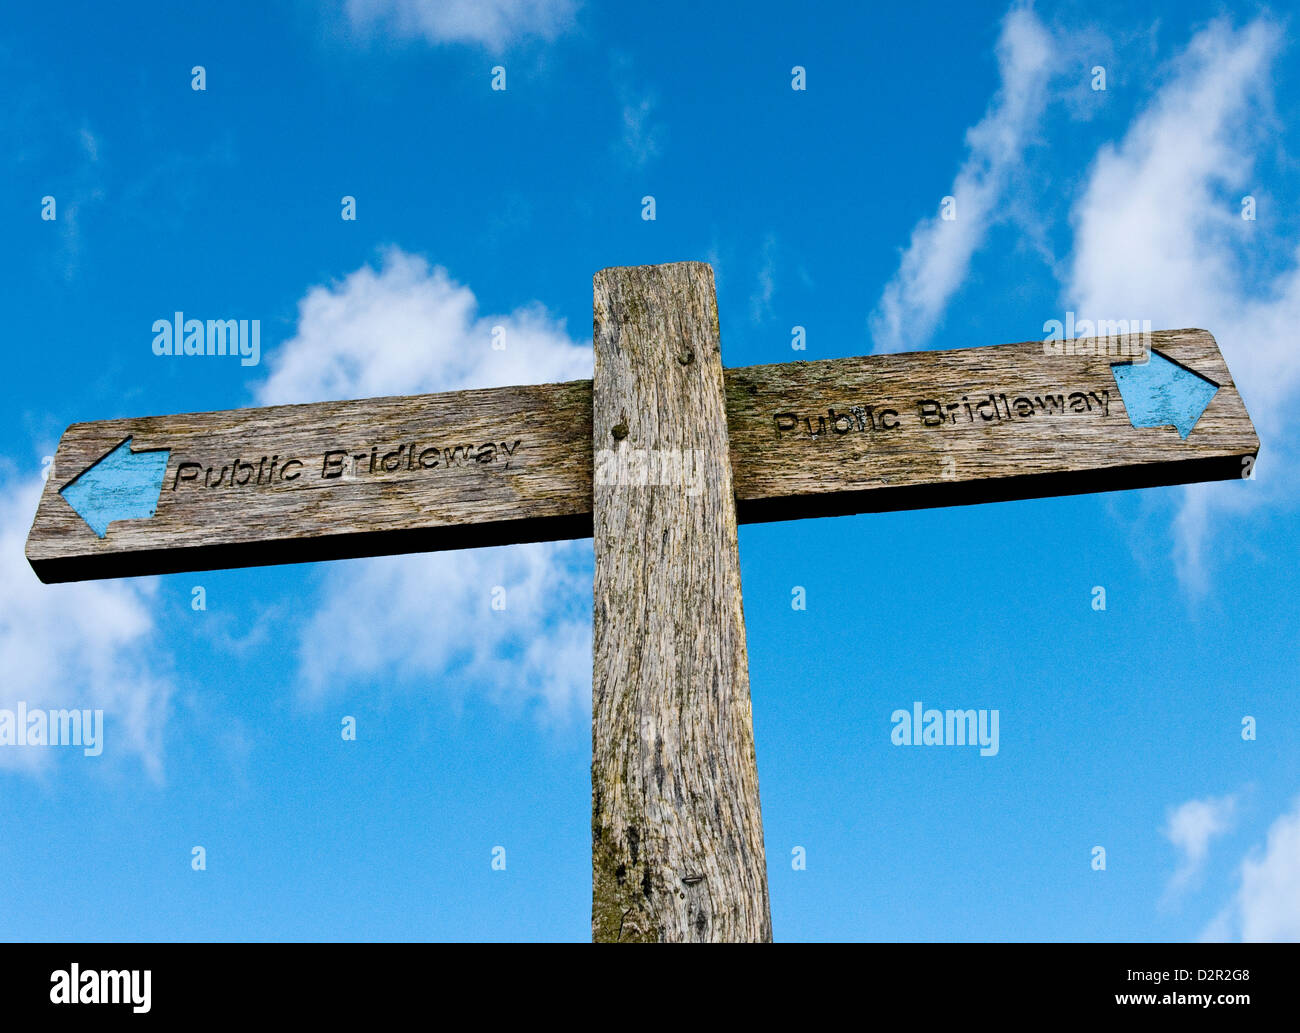 Signpost on the South Downs showing the direction of a Public Bridleway with blue sky and white clouds in the background Stock Photo